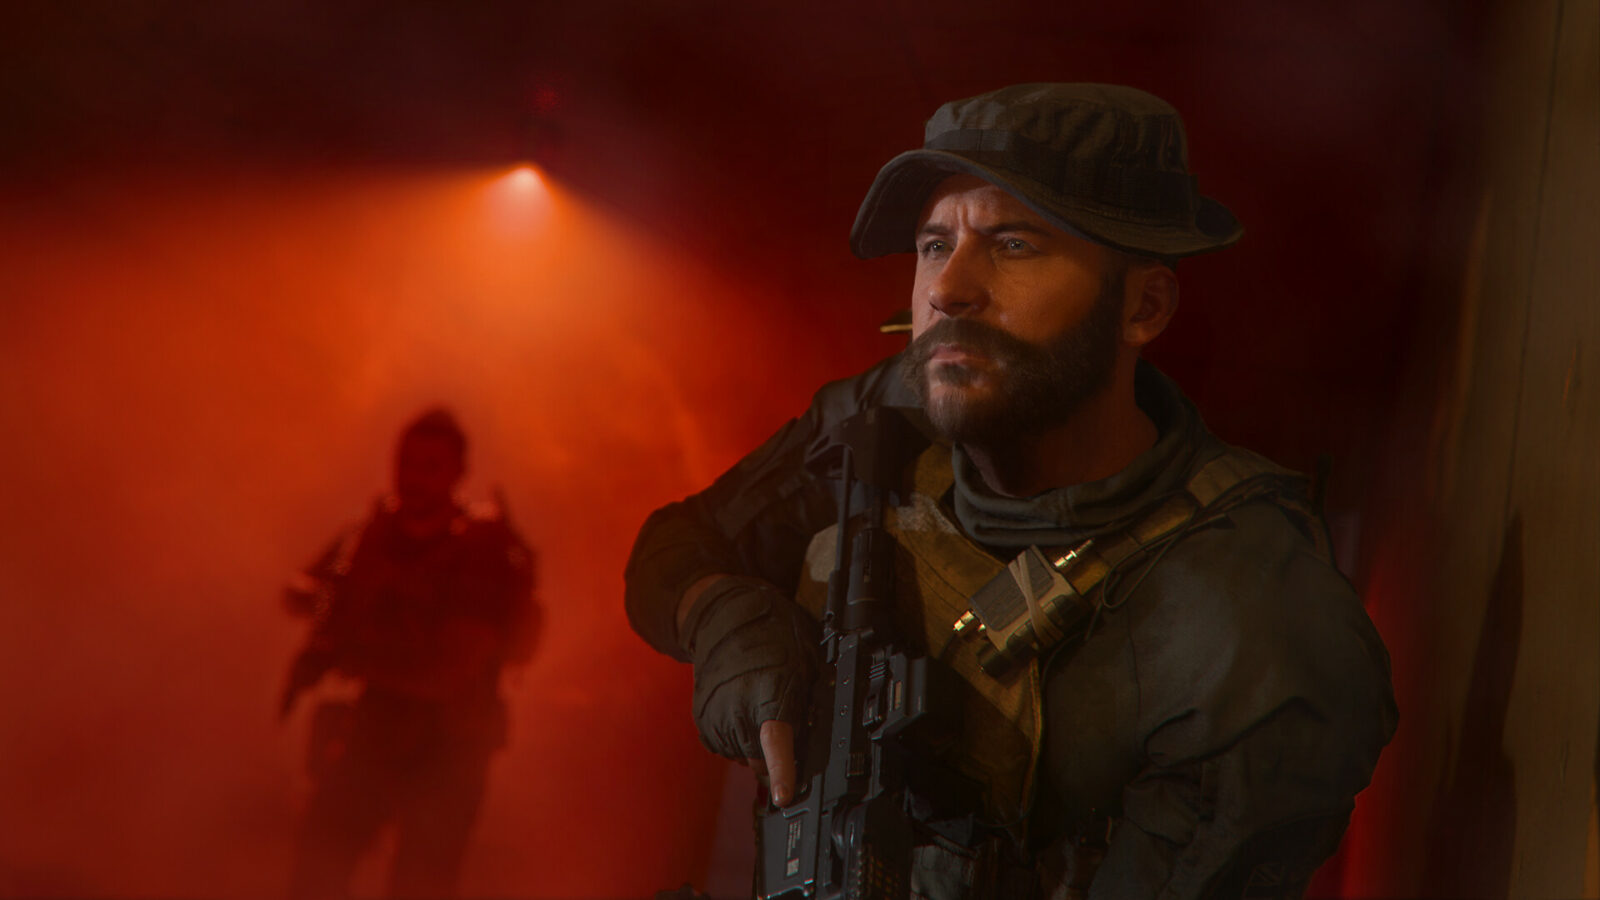 This is what Activisions approved acquisition means for Call of